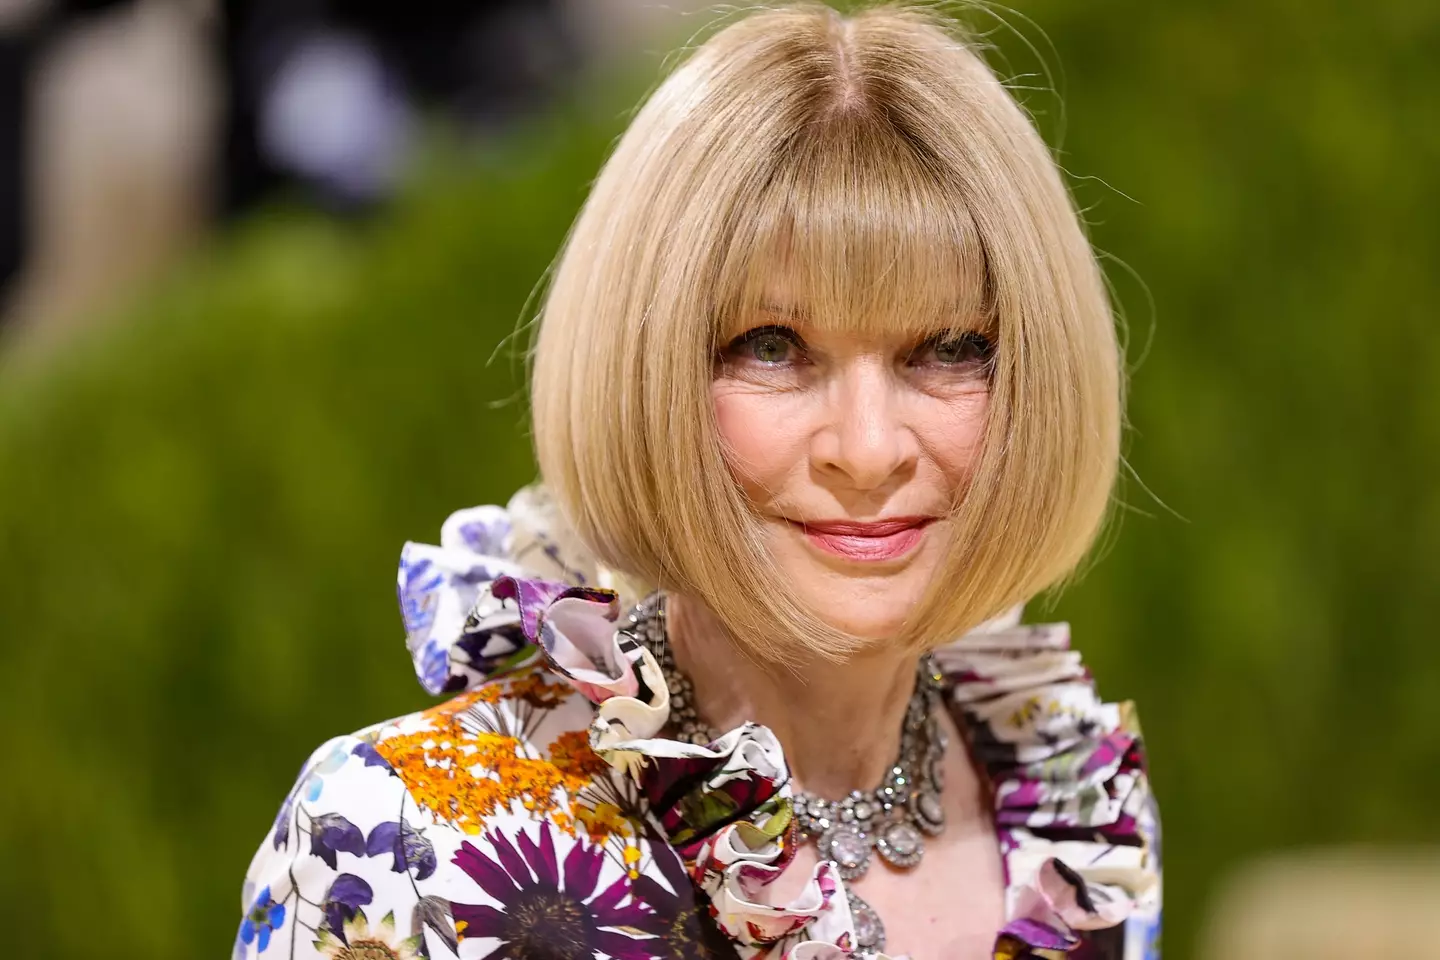 Anna Wintour at the 2021 Met Gala. (Theo Wargo/Getty Images)